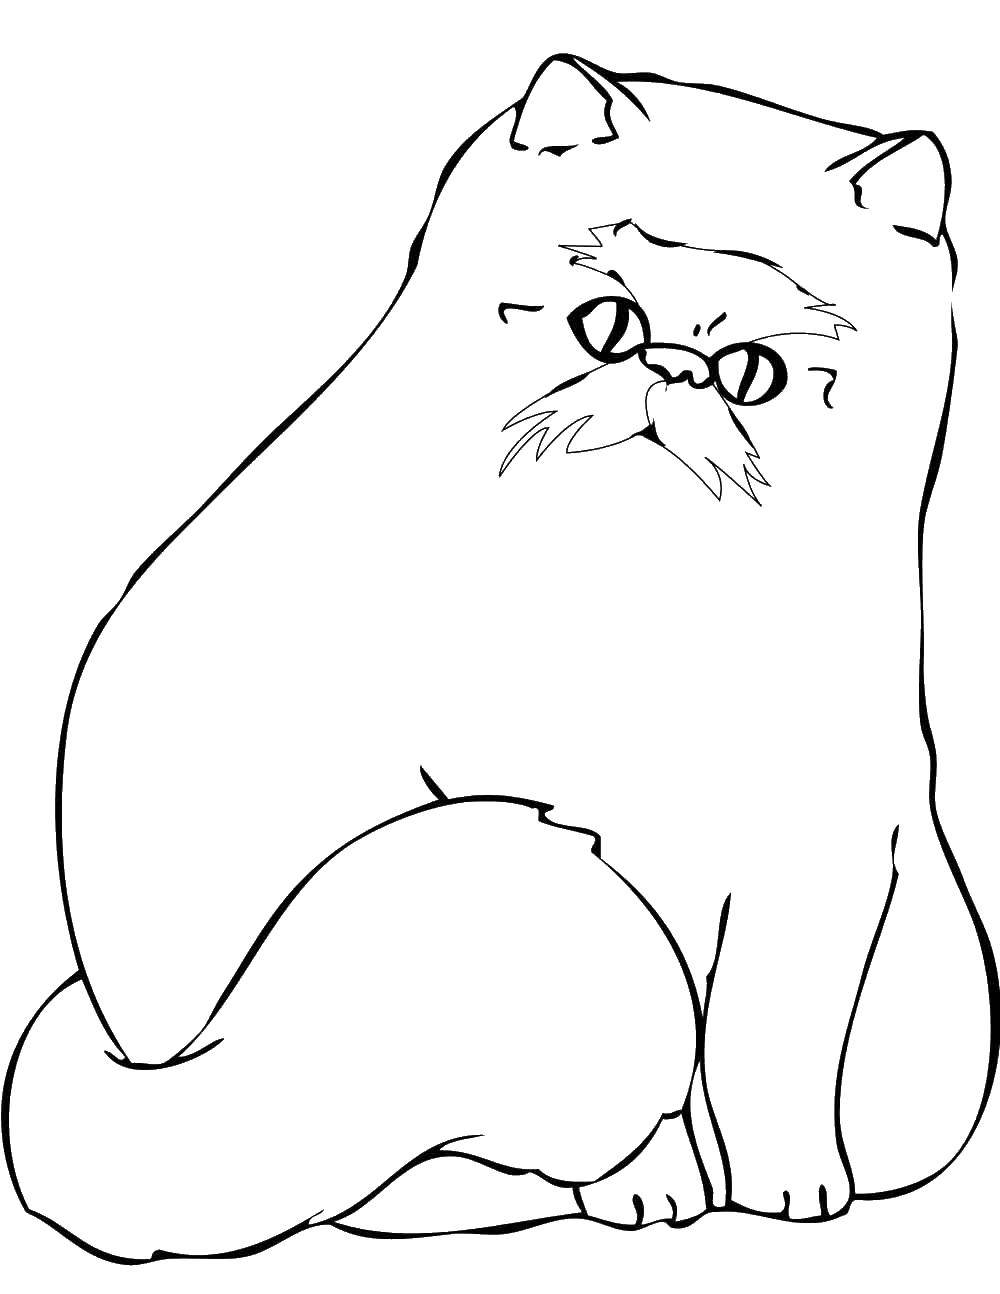 Coloring Fluffy cat. Category The cat. Tags:  the cat, tail, eyes.